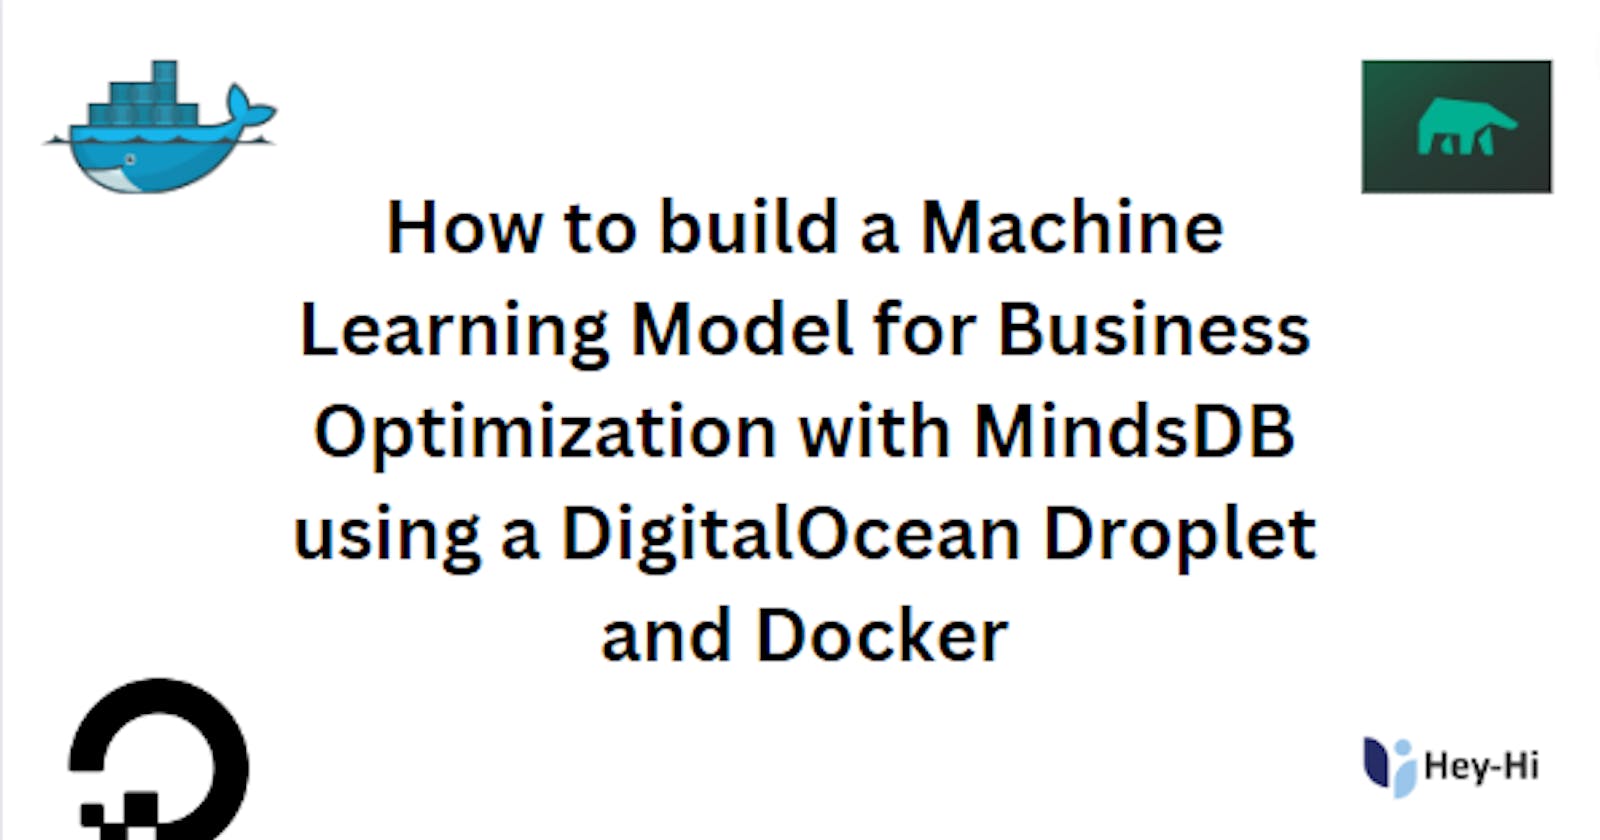 How to build a Machine Learning Model for Business Optimization with MindsDB using a DigitalOcean Droplet and Docker